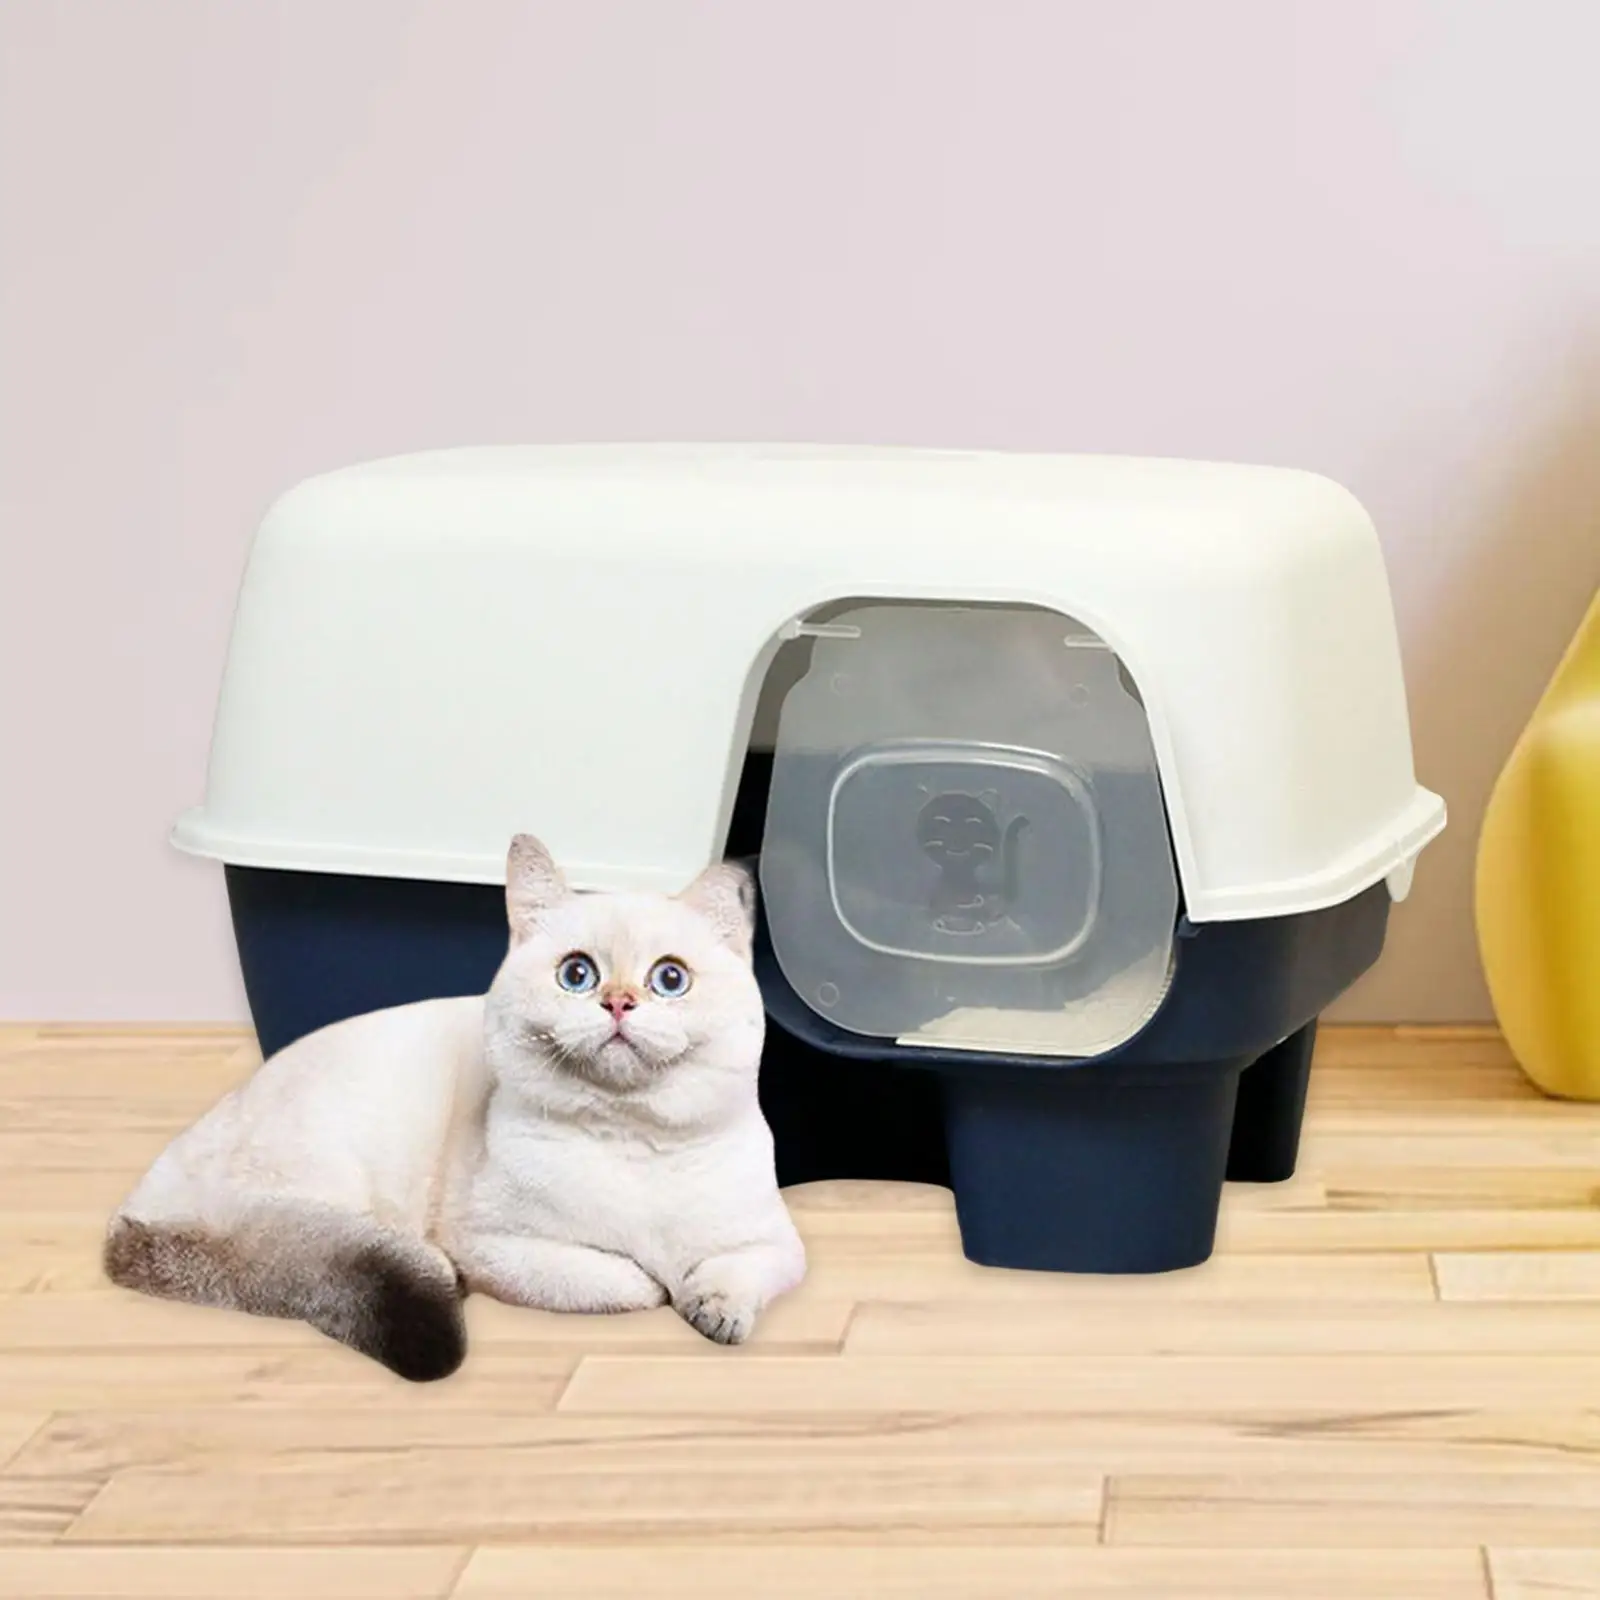 Corridor Enclosed Cat Litter Box Detachable with Gate Portable High Side Cat Bedpans Pet Supplies Easy Clean Kitty Litter Pan